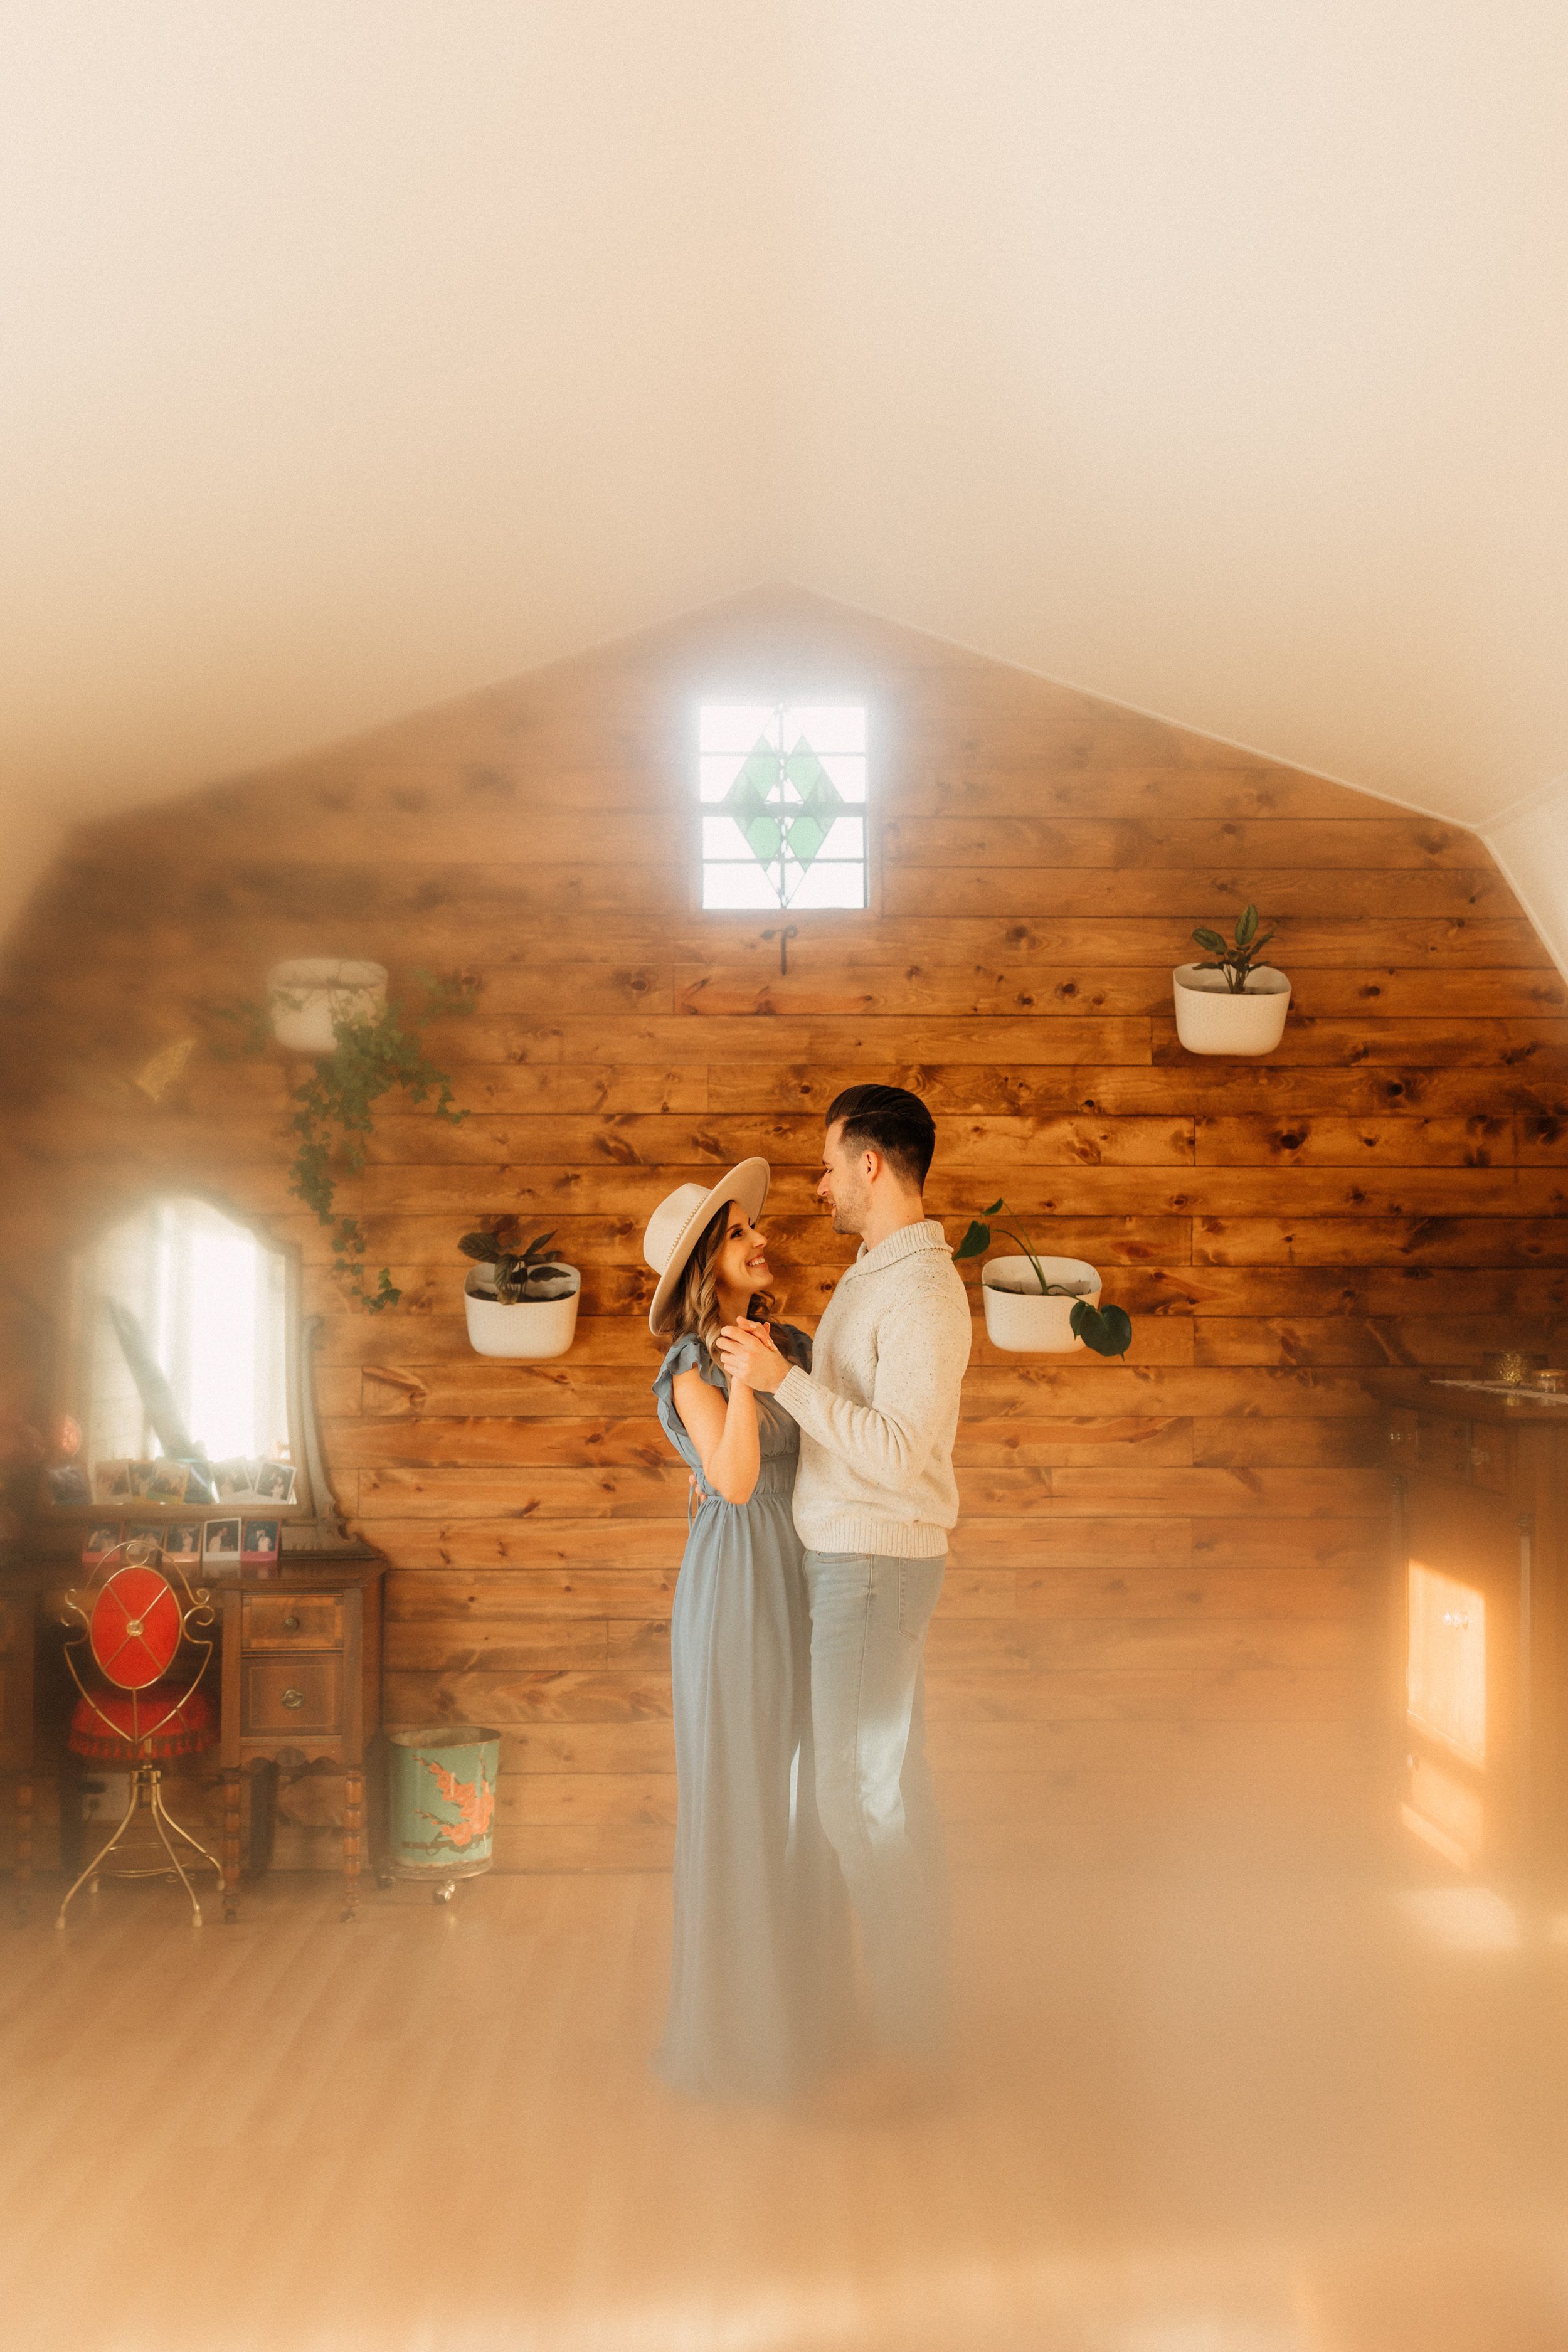 Laura_Ben_Engagment_Session_Winterset_Des_moines_Iowa_Couples_Photographer_Iris_Aisle_Cabin_Conservatory_Candid_Snow_Day_Winter_KMP_Photography-9564.jpg